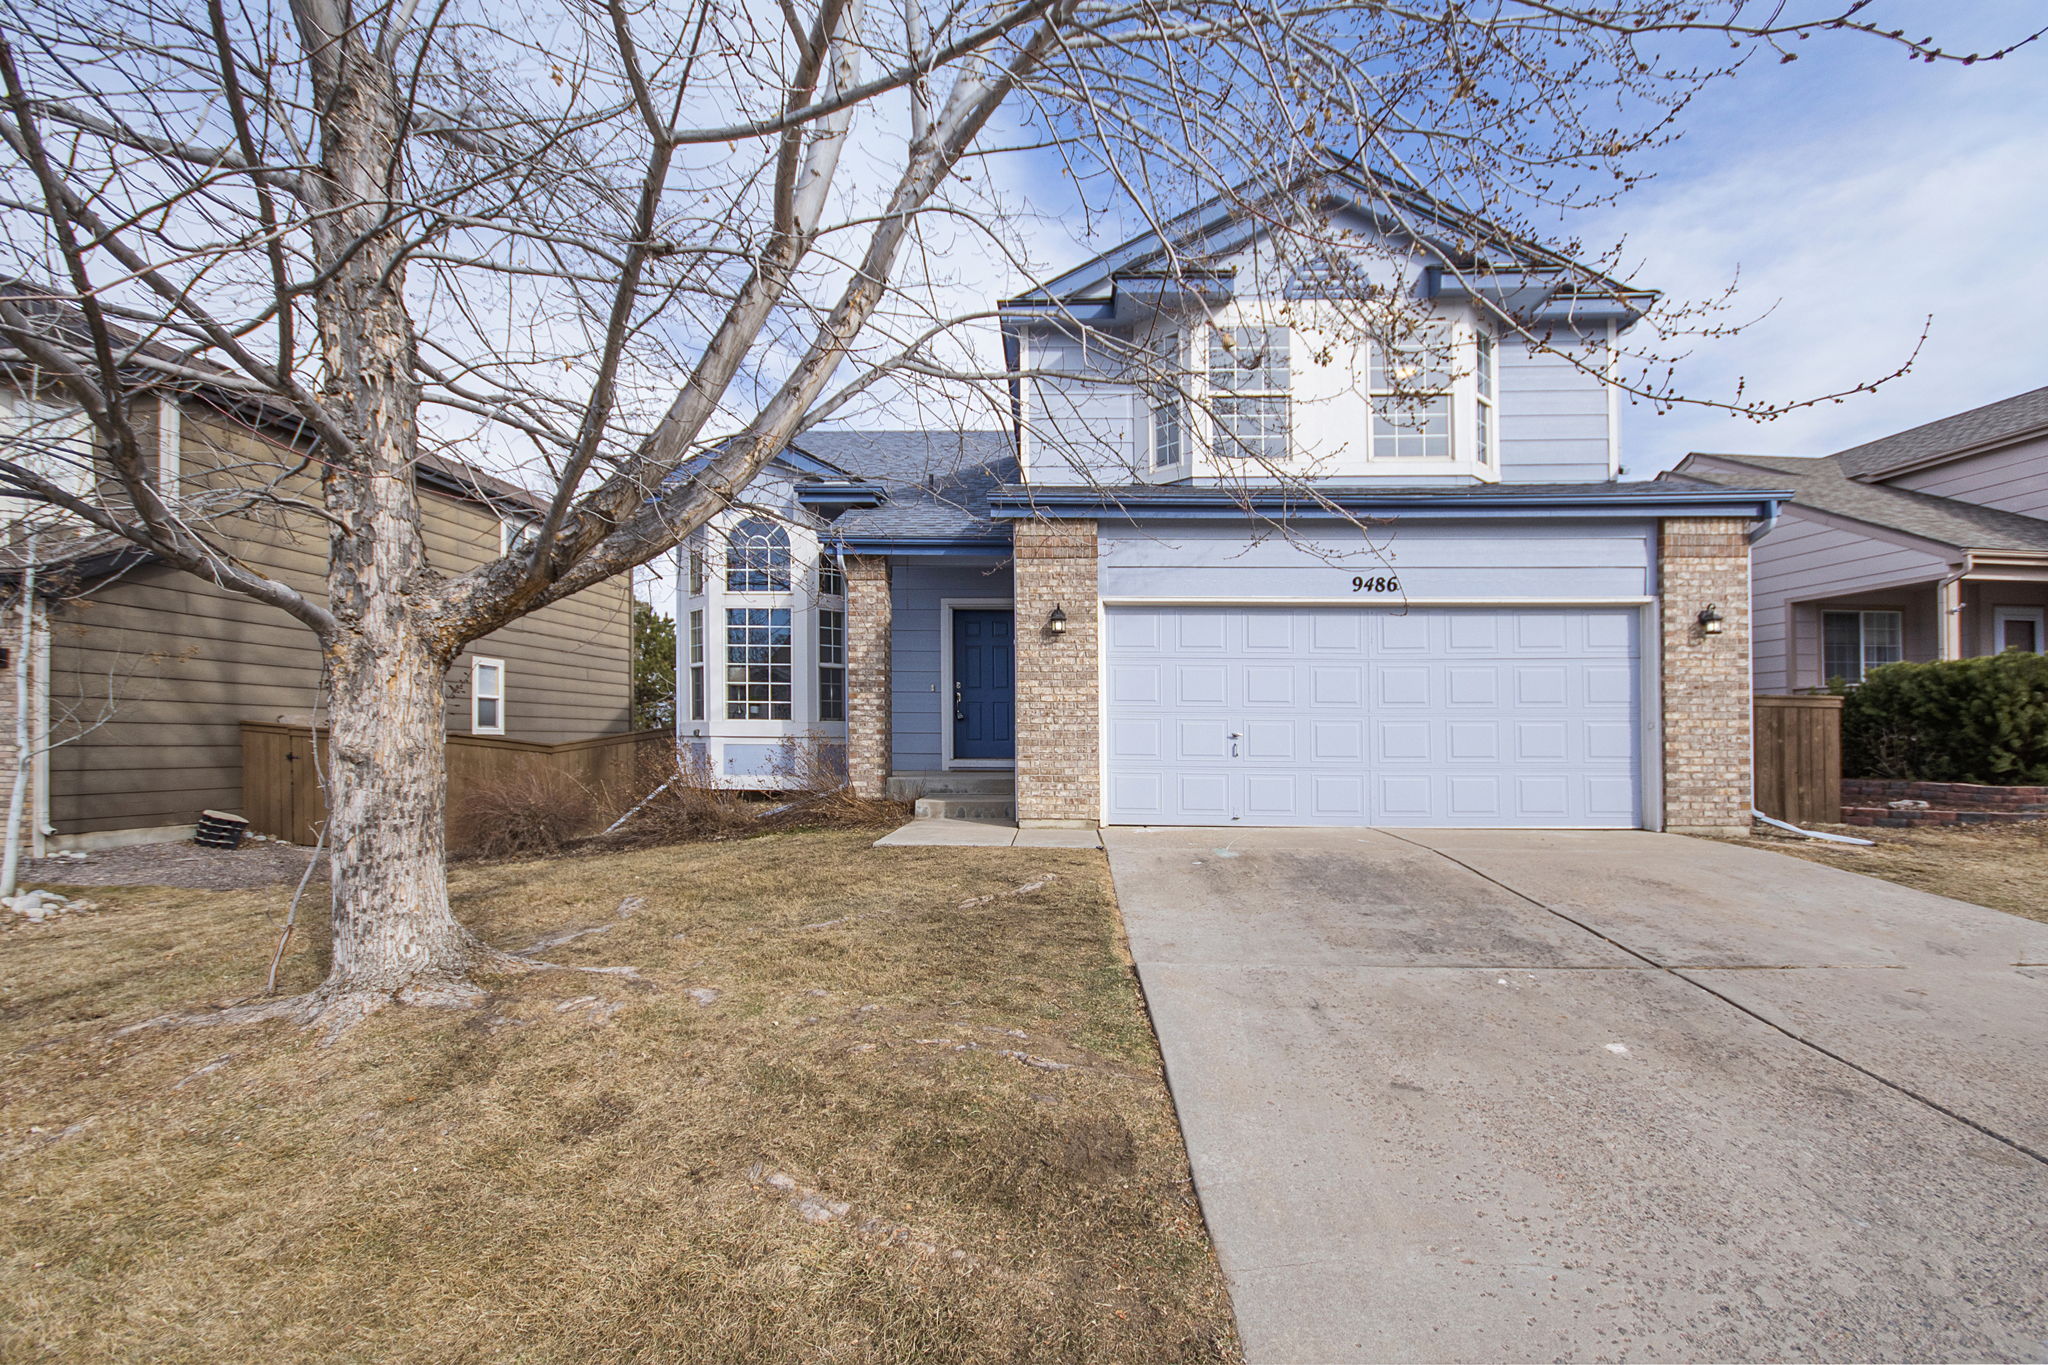  9486 High Cliffe St, Highlands Ranch, CO 80129, US